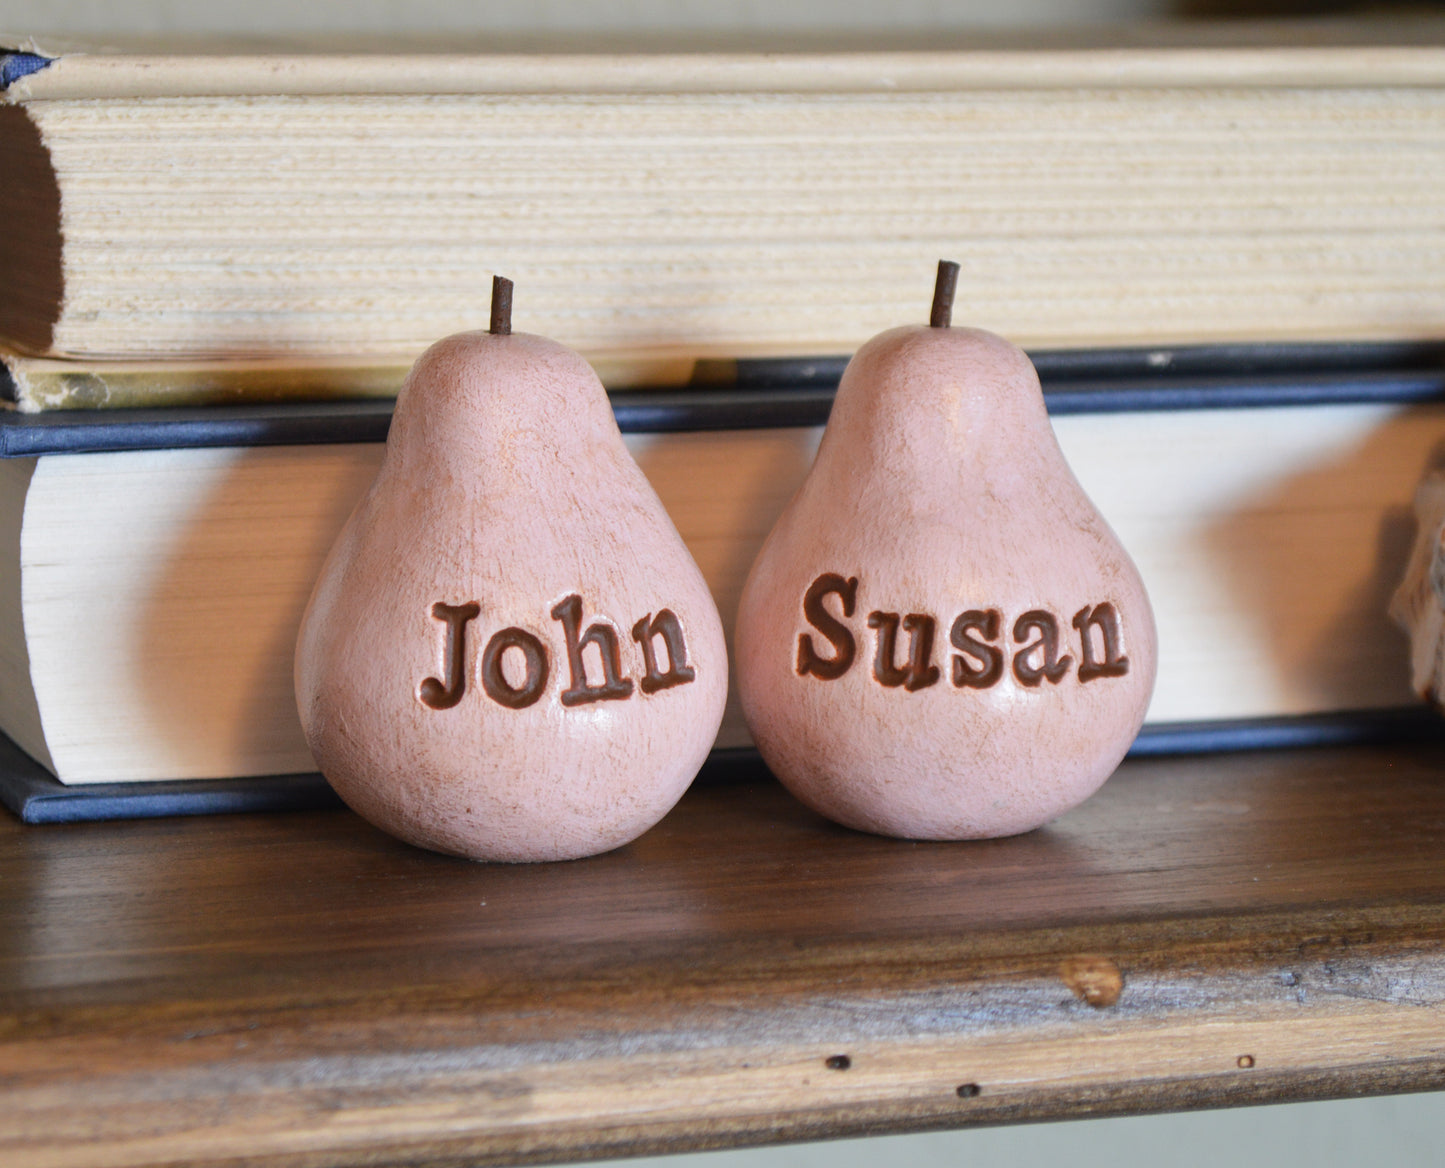 Custom worded vintage pink pears / Any words you want